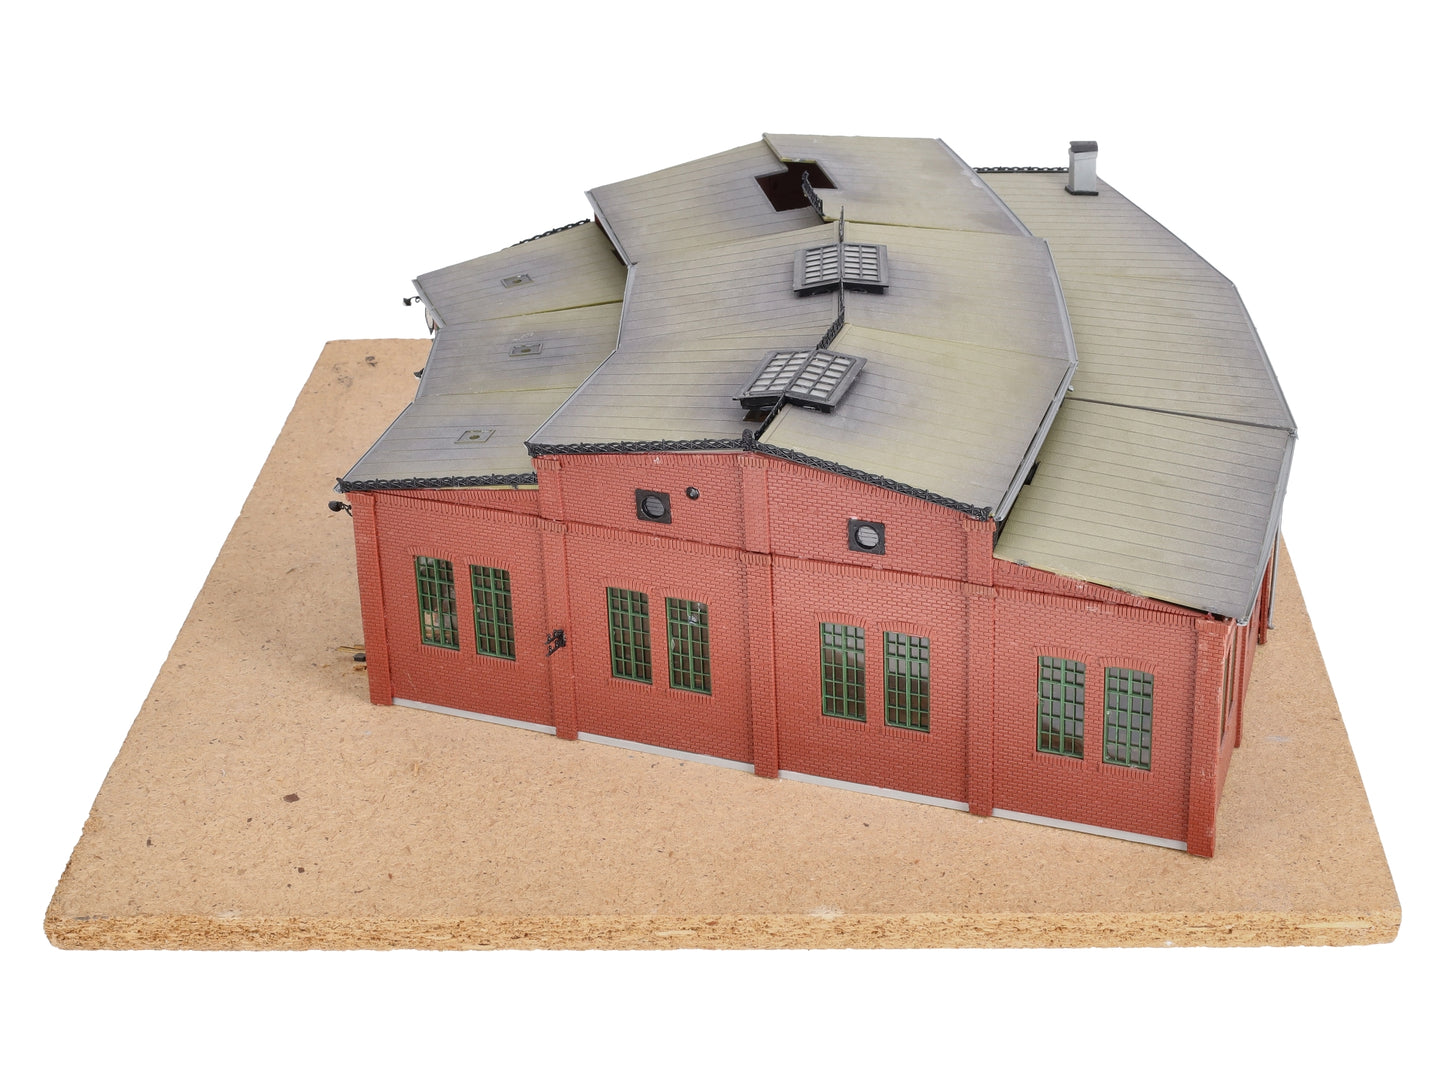 Vollmer 5754 Three-Stall Roundhouse Plastic Kit- Assembled